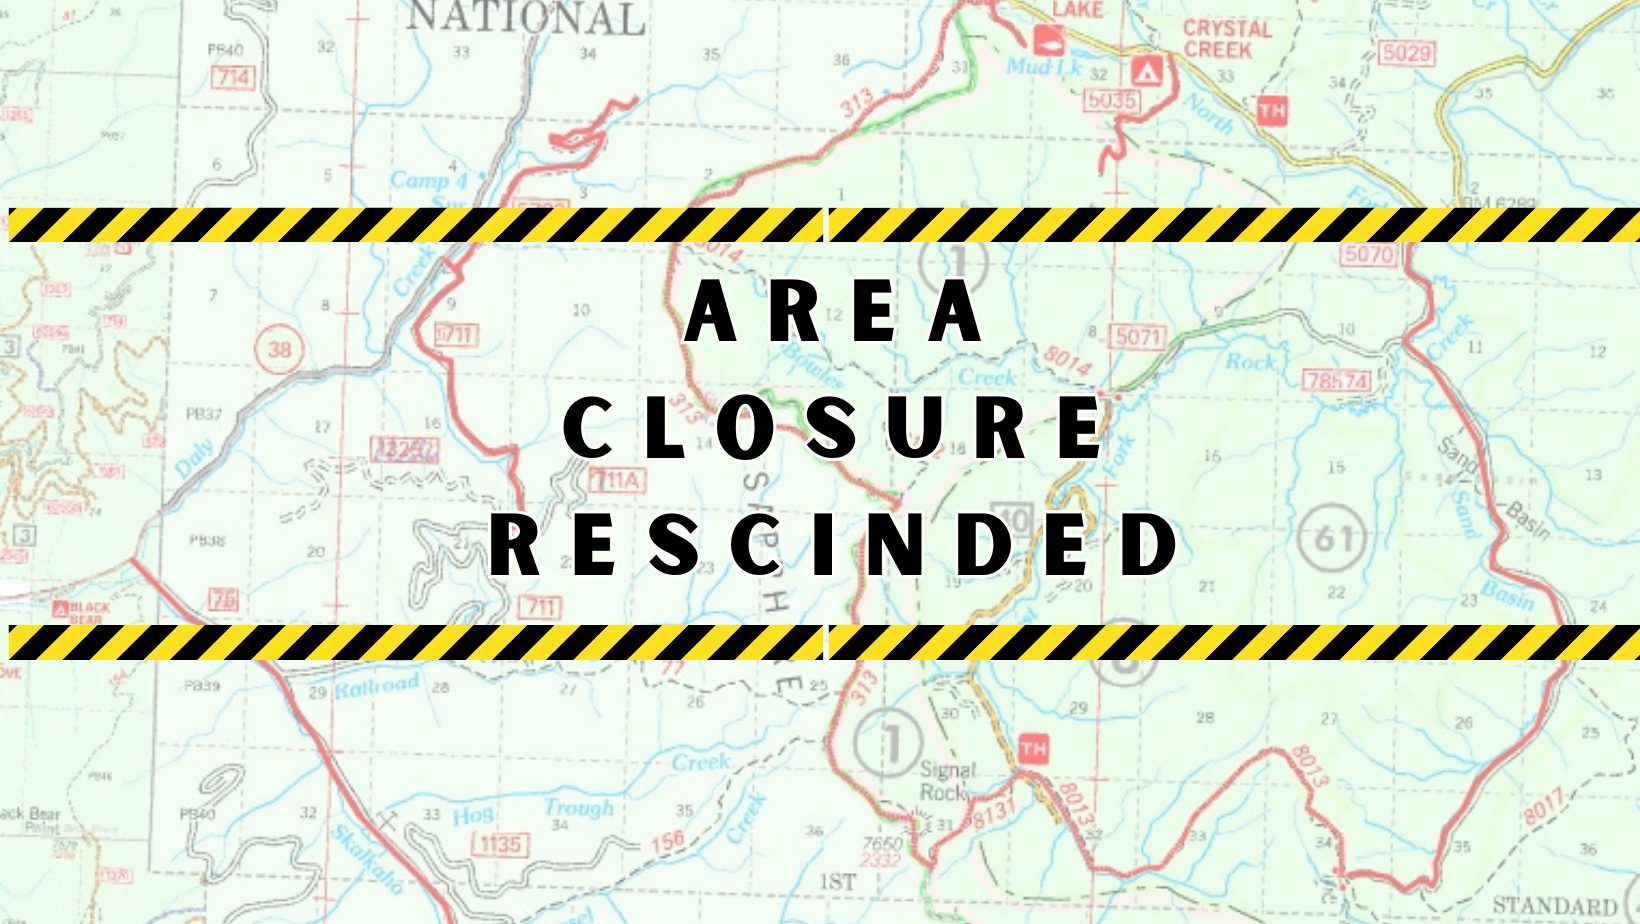 Graphic showing area closure rescinded